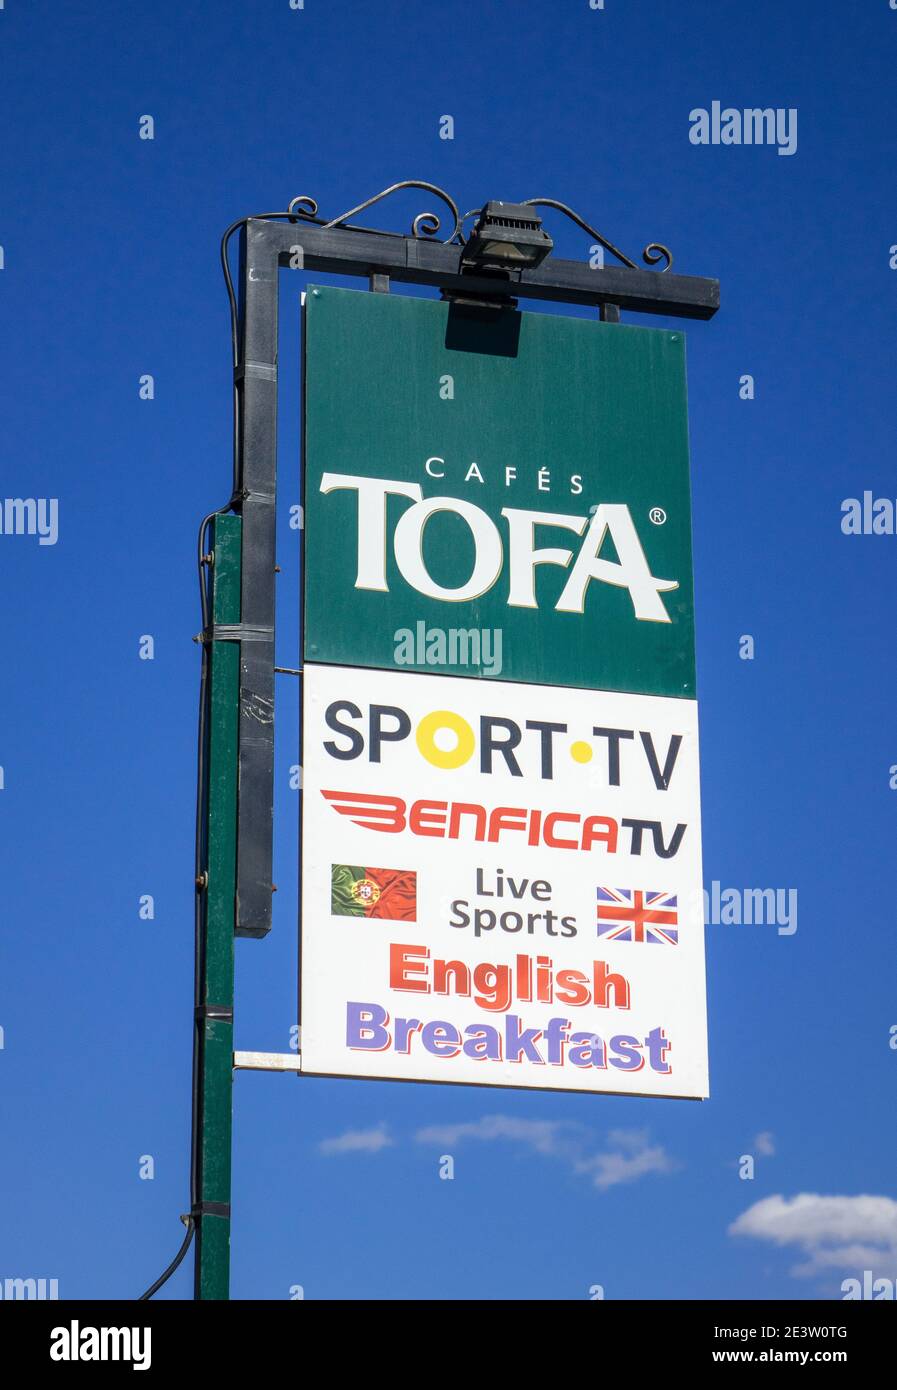 Cafe Tofa Sign A Cafe In Albufeira Portugal Advertising Benfica TV  Live Sports Bar And English Breakfast Stock Photo